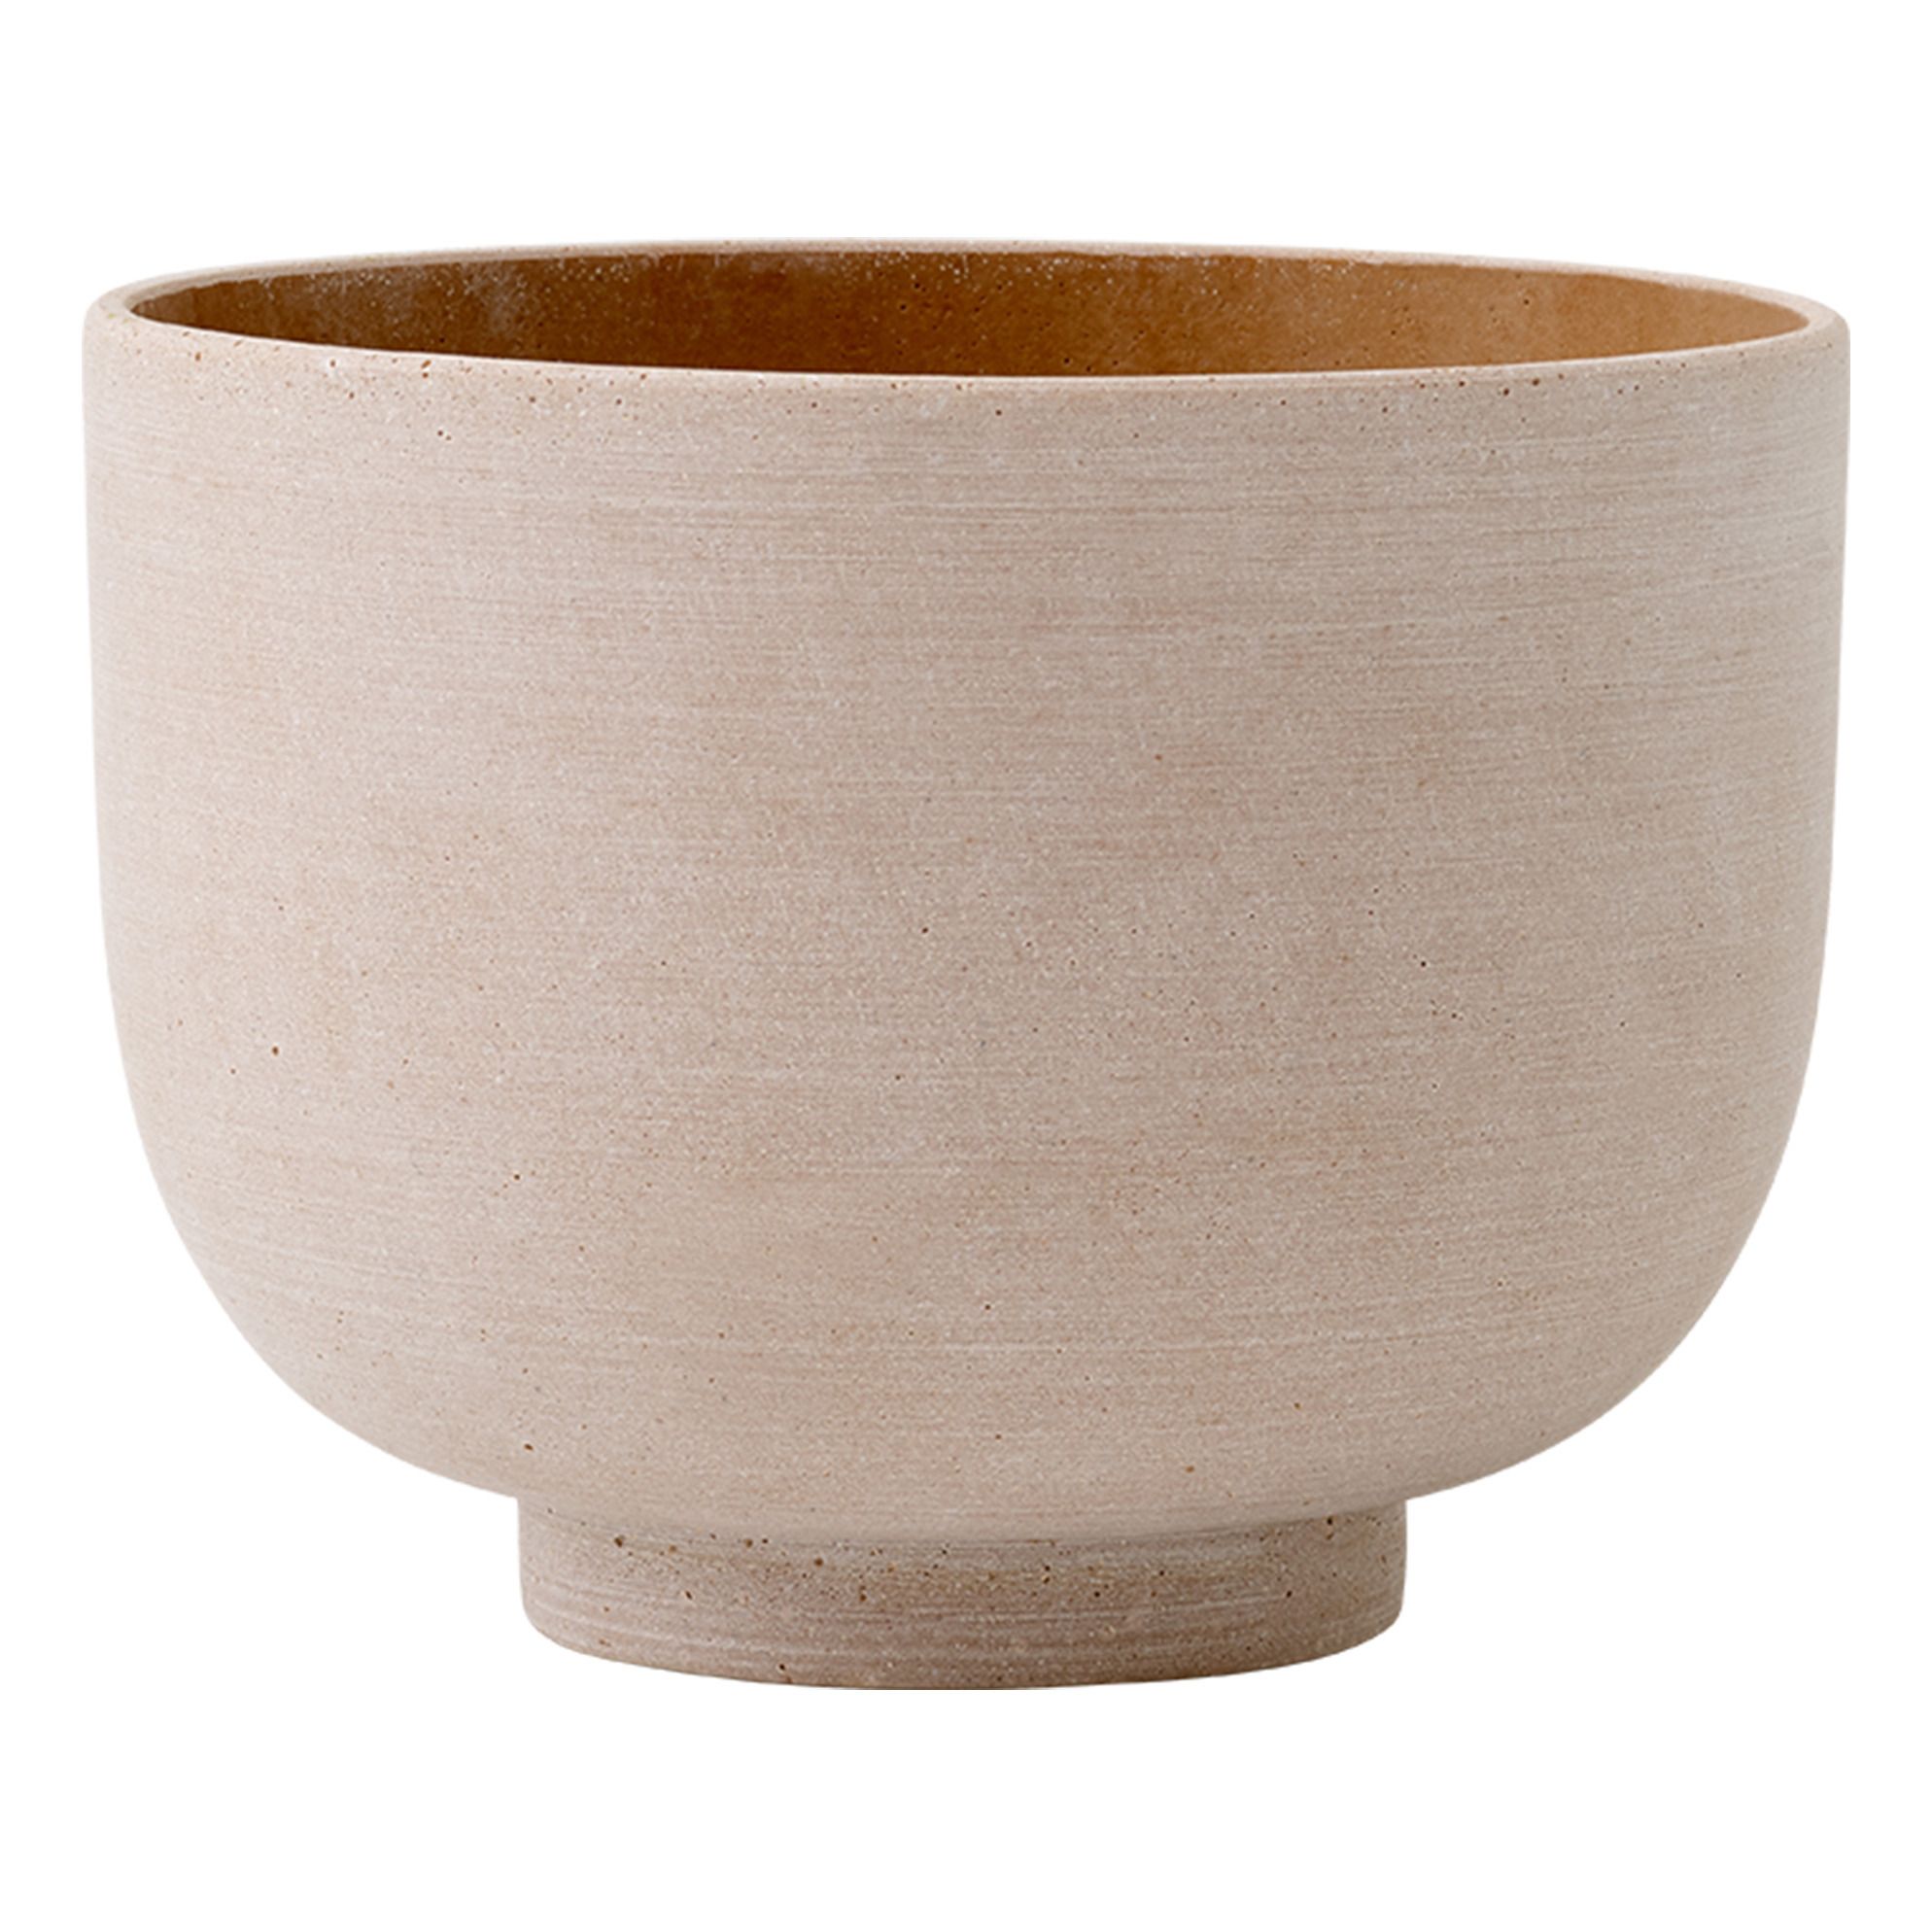 & Tradition - Pot Collect - Ocre